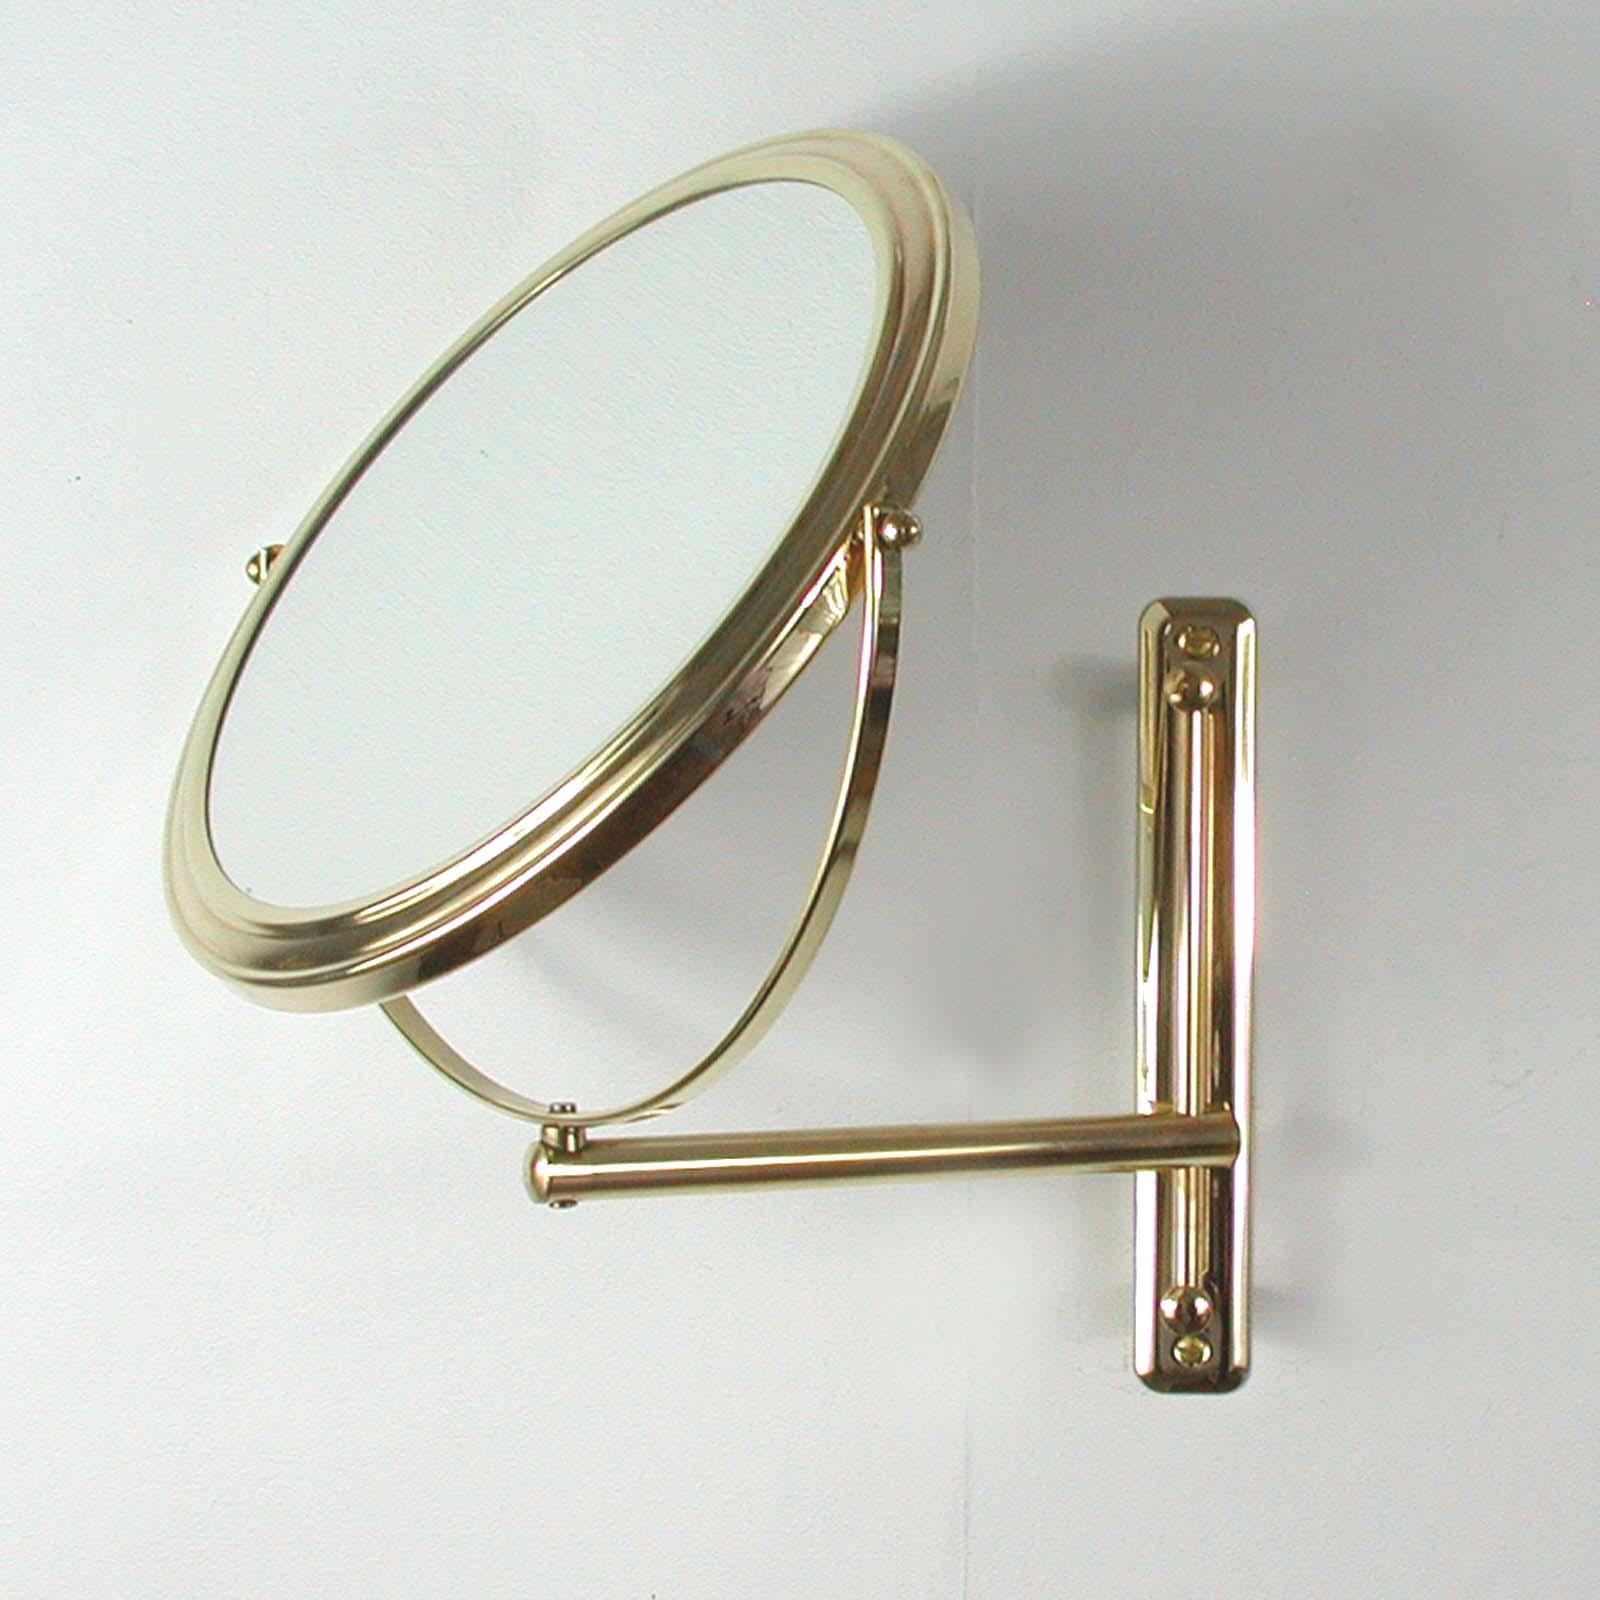 Italian Articulating and Adjustable Brass Vanity 2-Sided Wall Mirror, 1950s For Sale 7